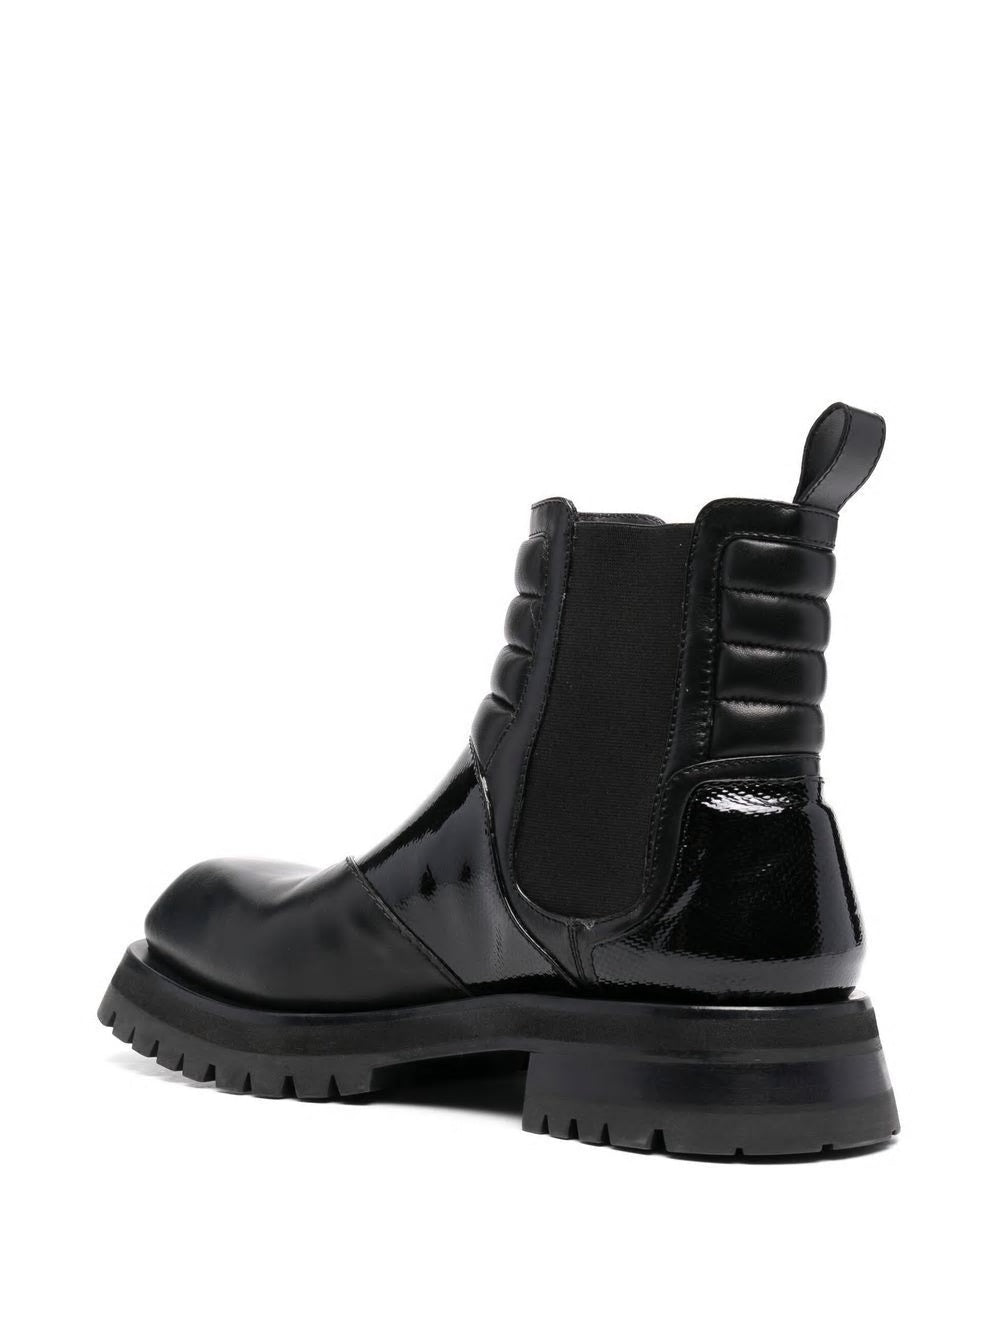 BALMAIN Stylish Men's Boots for FW22 Collection